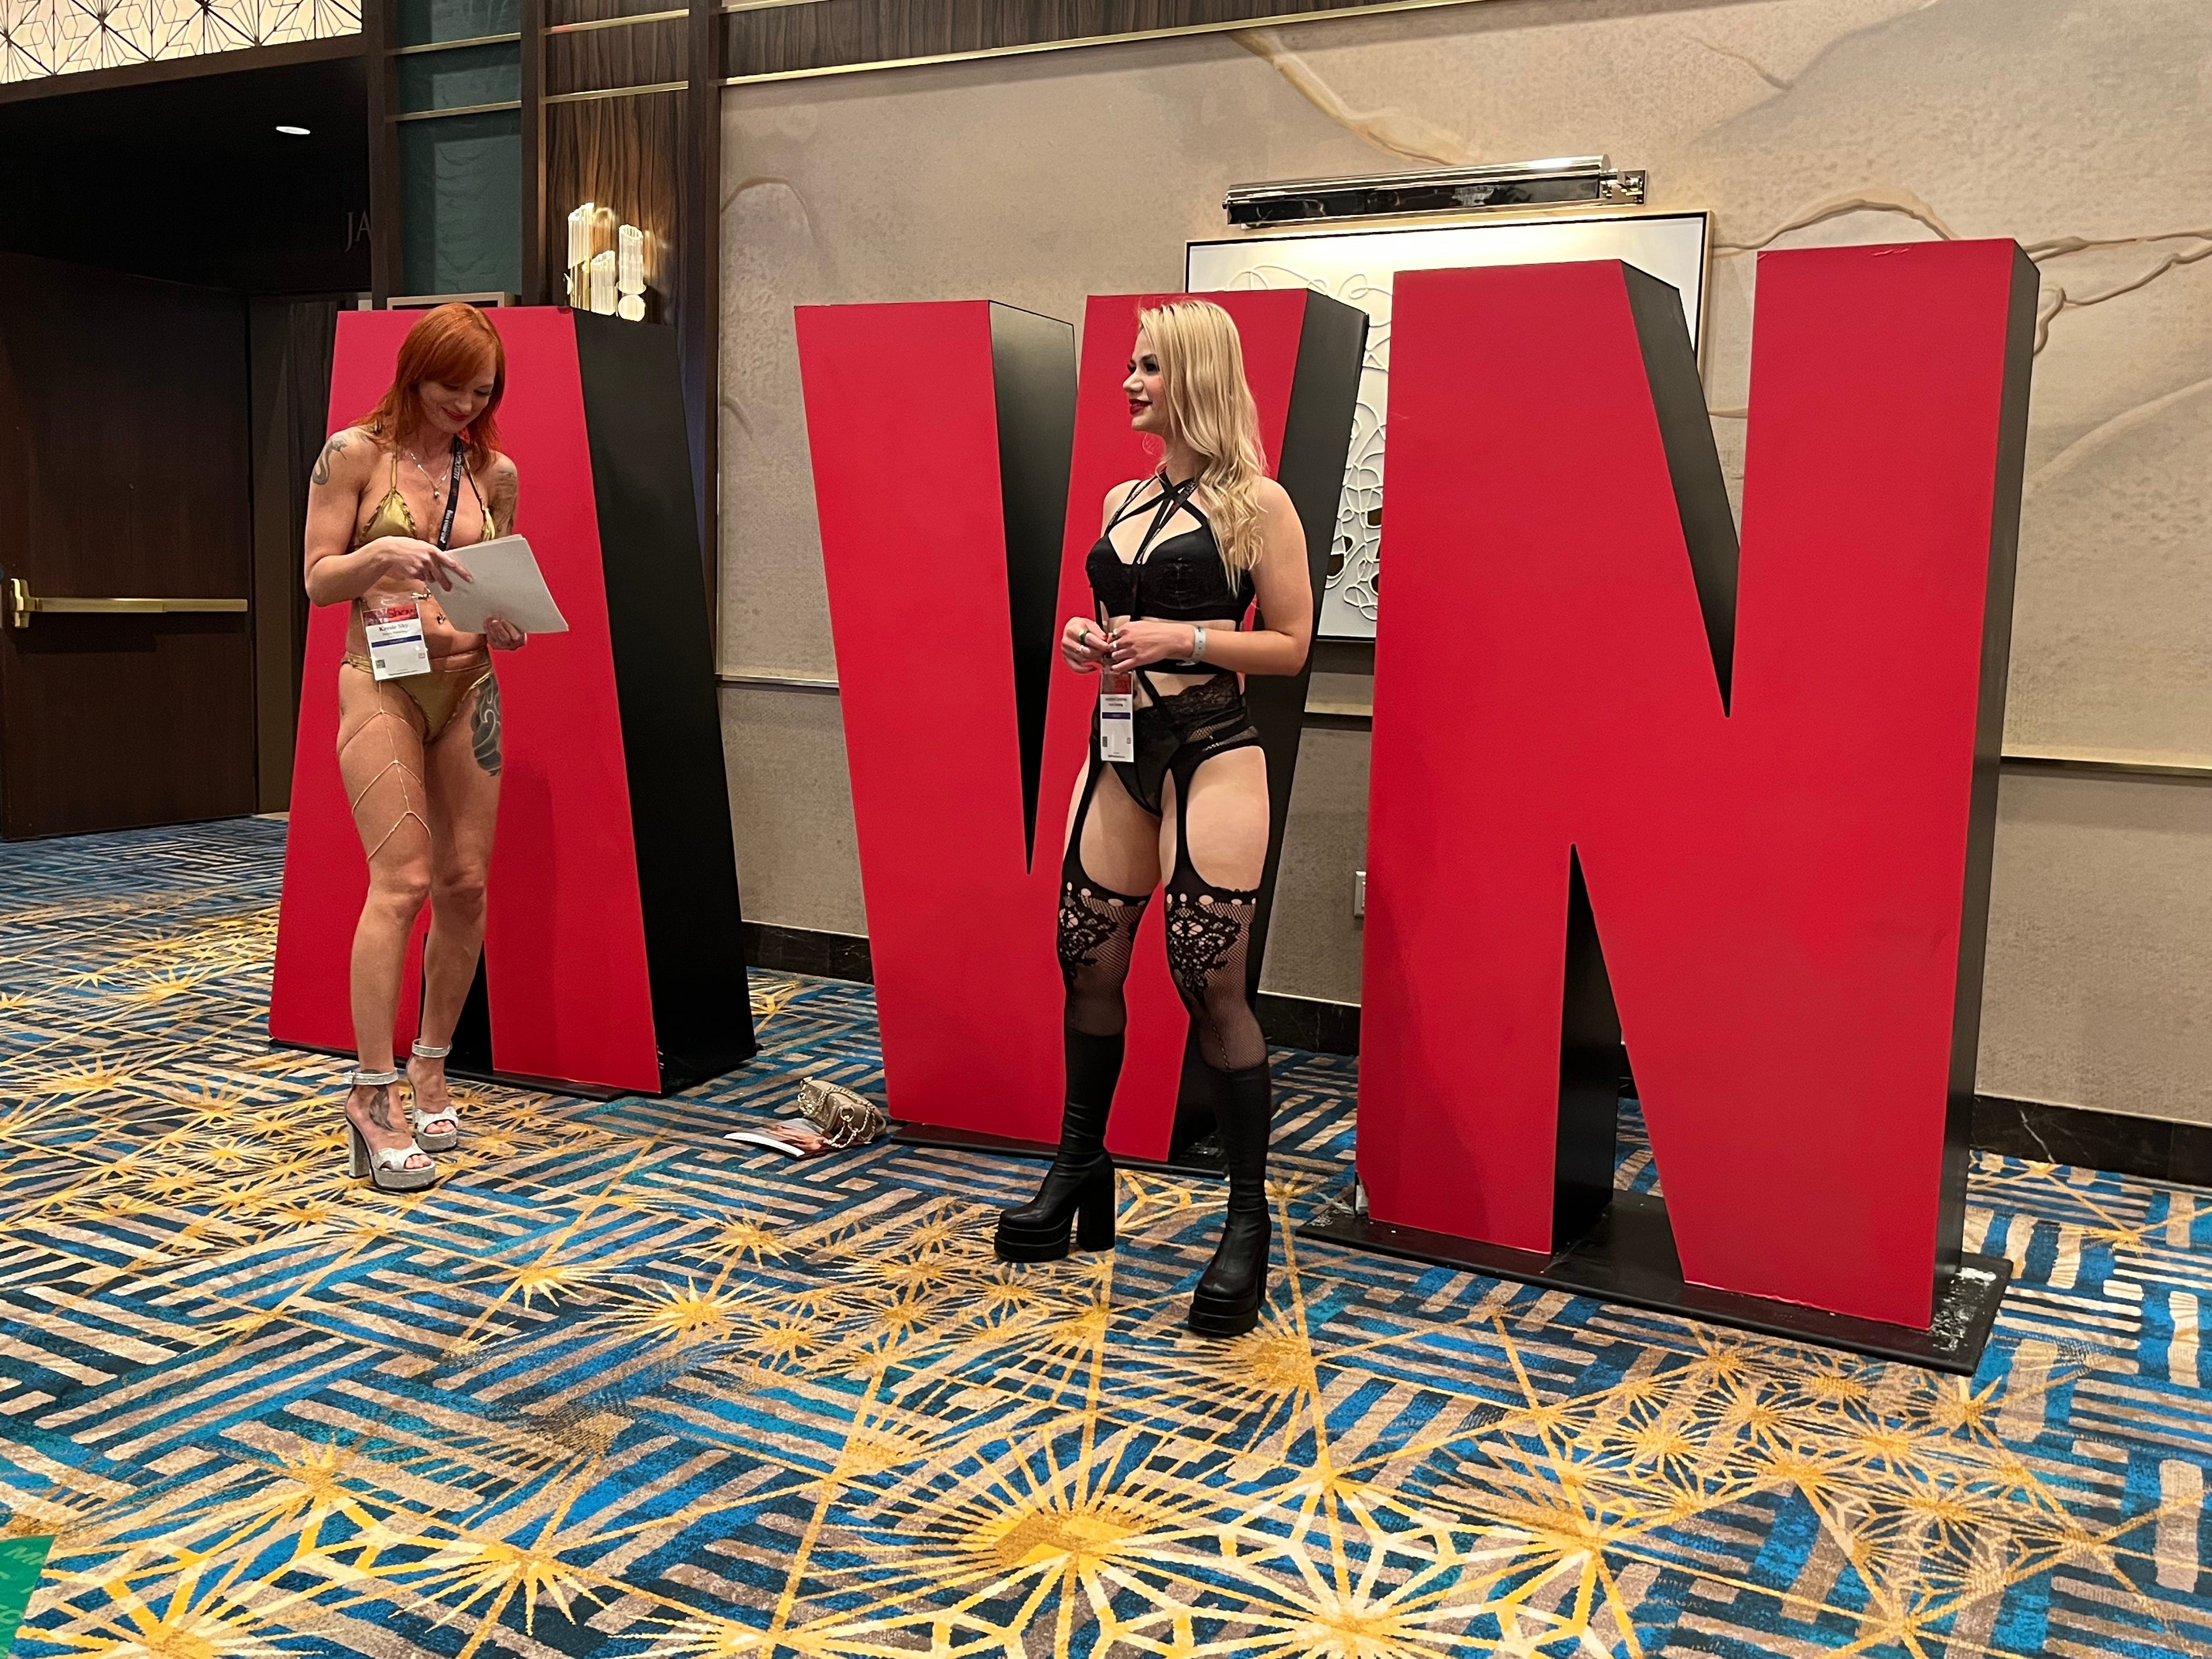 Upskirt In Las Vegas Adult - Adult entertainment convention coverage - by Michael Estrin